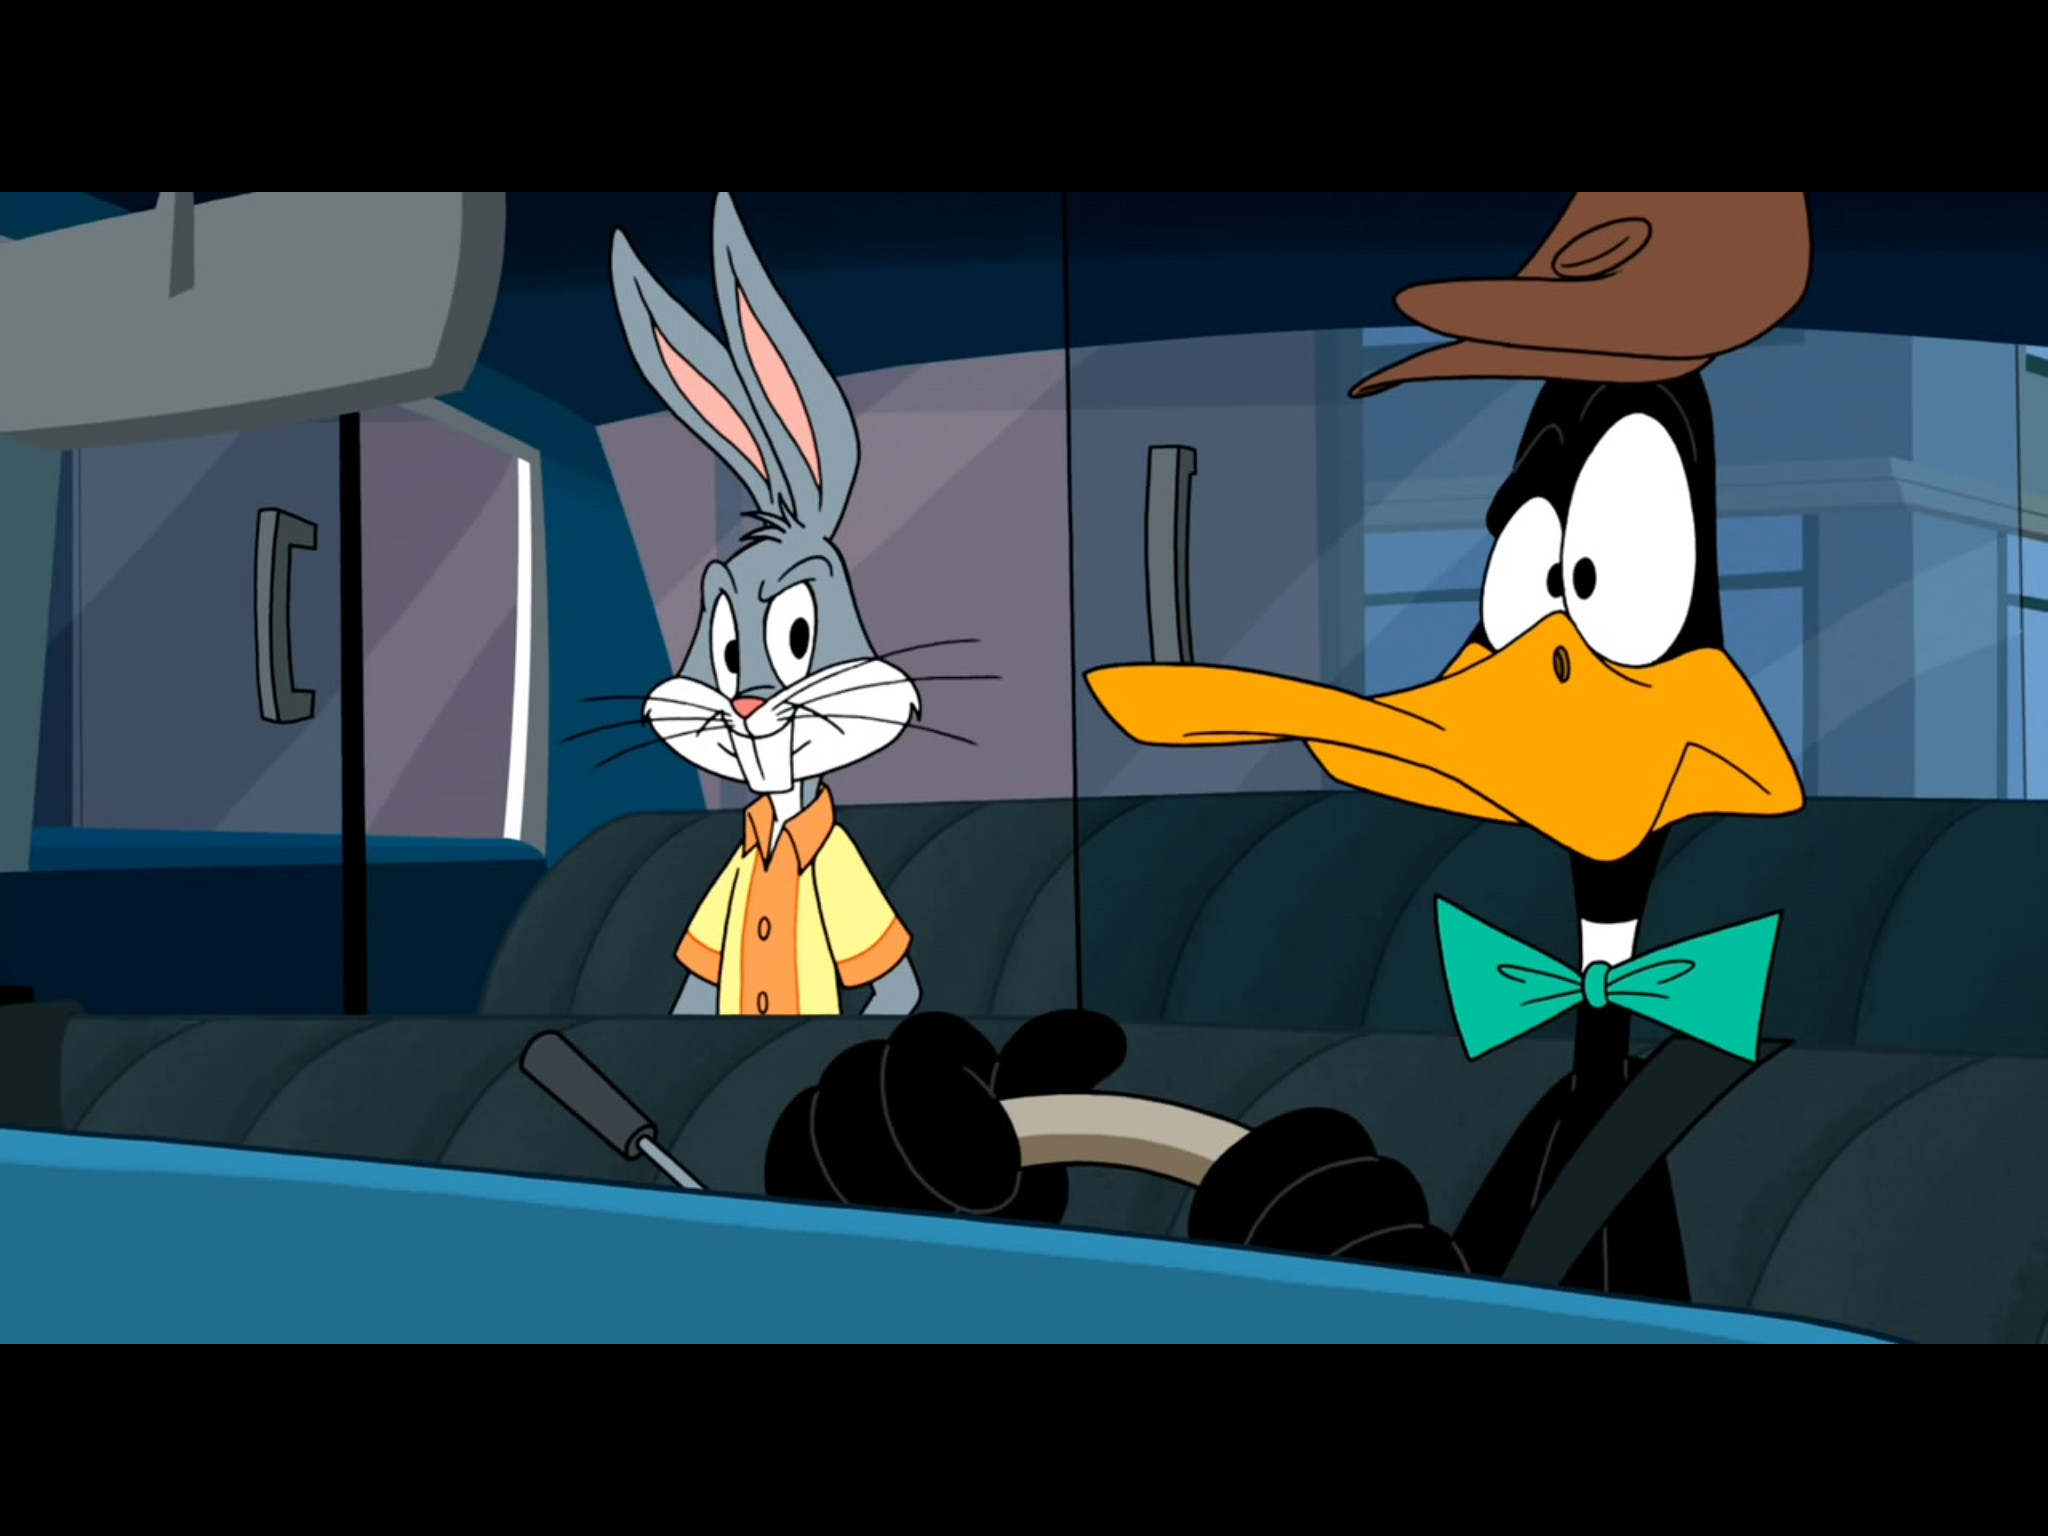 2048x1536 Bugs Bunny and Daffy Duck from Looney Tunes: Rabbit Run